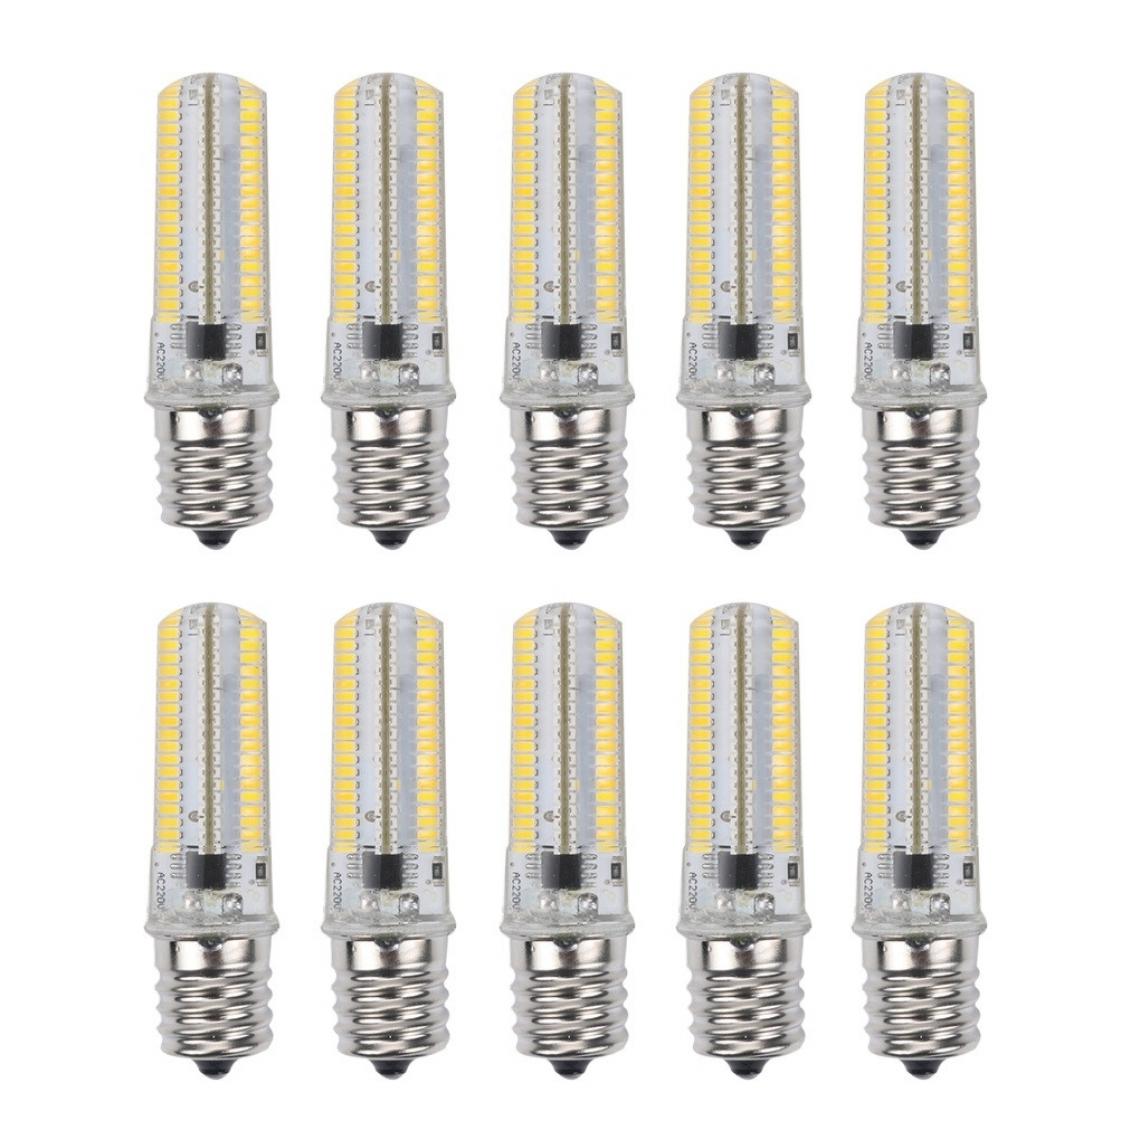 Wewoo - Dimmable E17 7Watts 152LED 3014 SMD 600-700 LM Blanc chaud froid Lampe de silicone LED Ampoules de maïs AC 220-240V AC 110-130V 10PCS 110V Taille - Ampoules LED